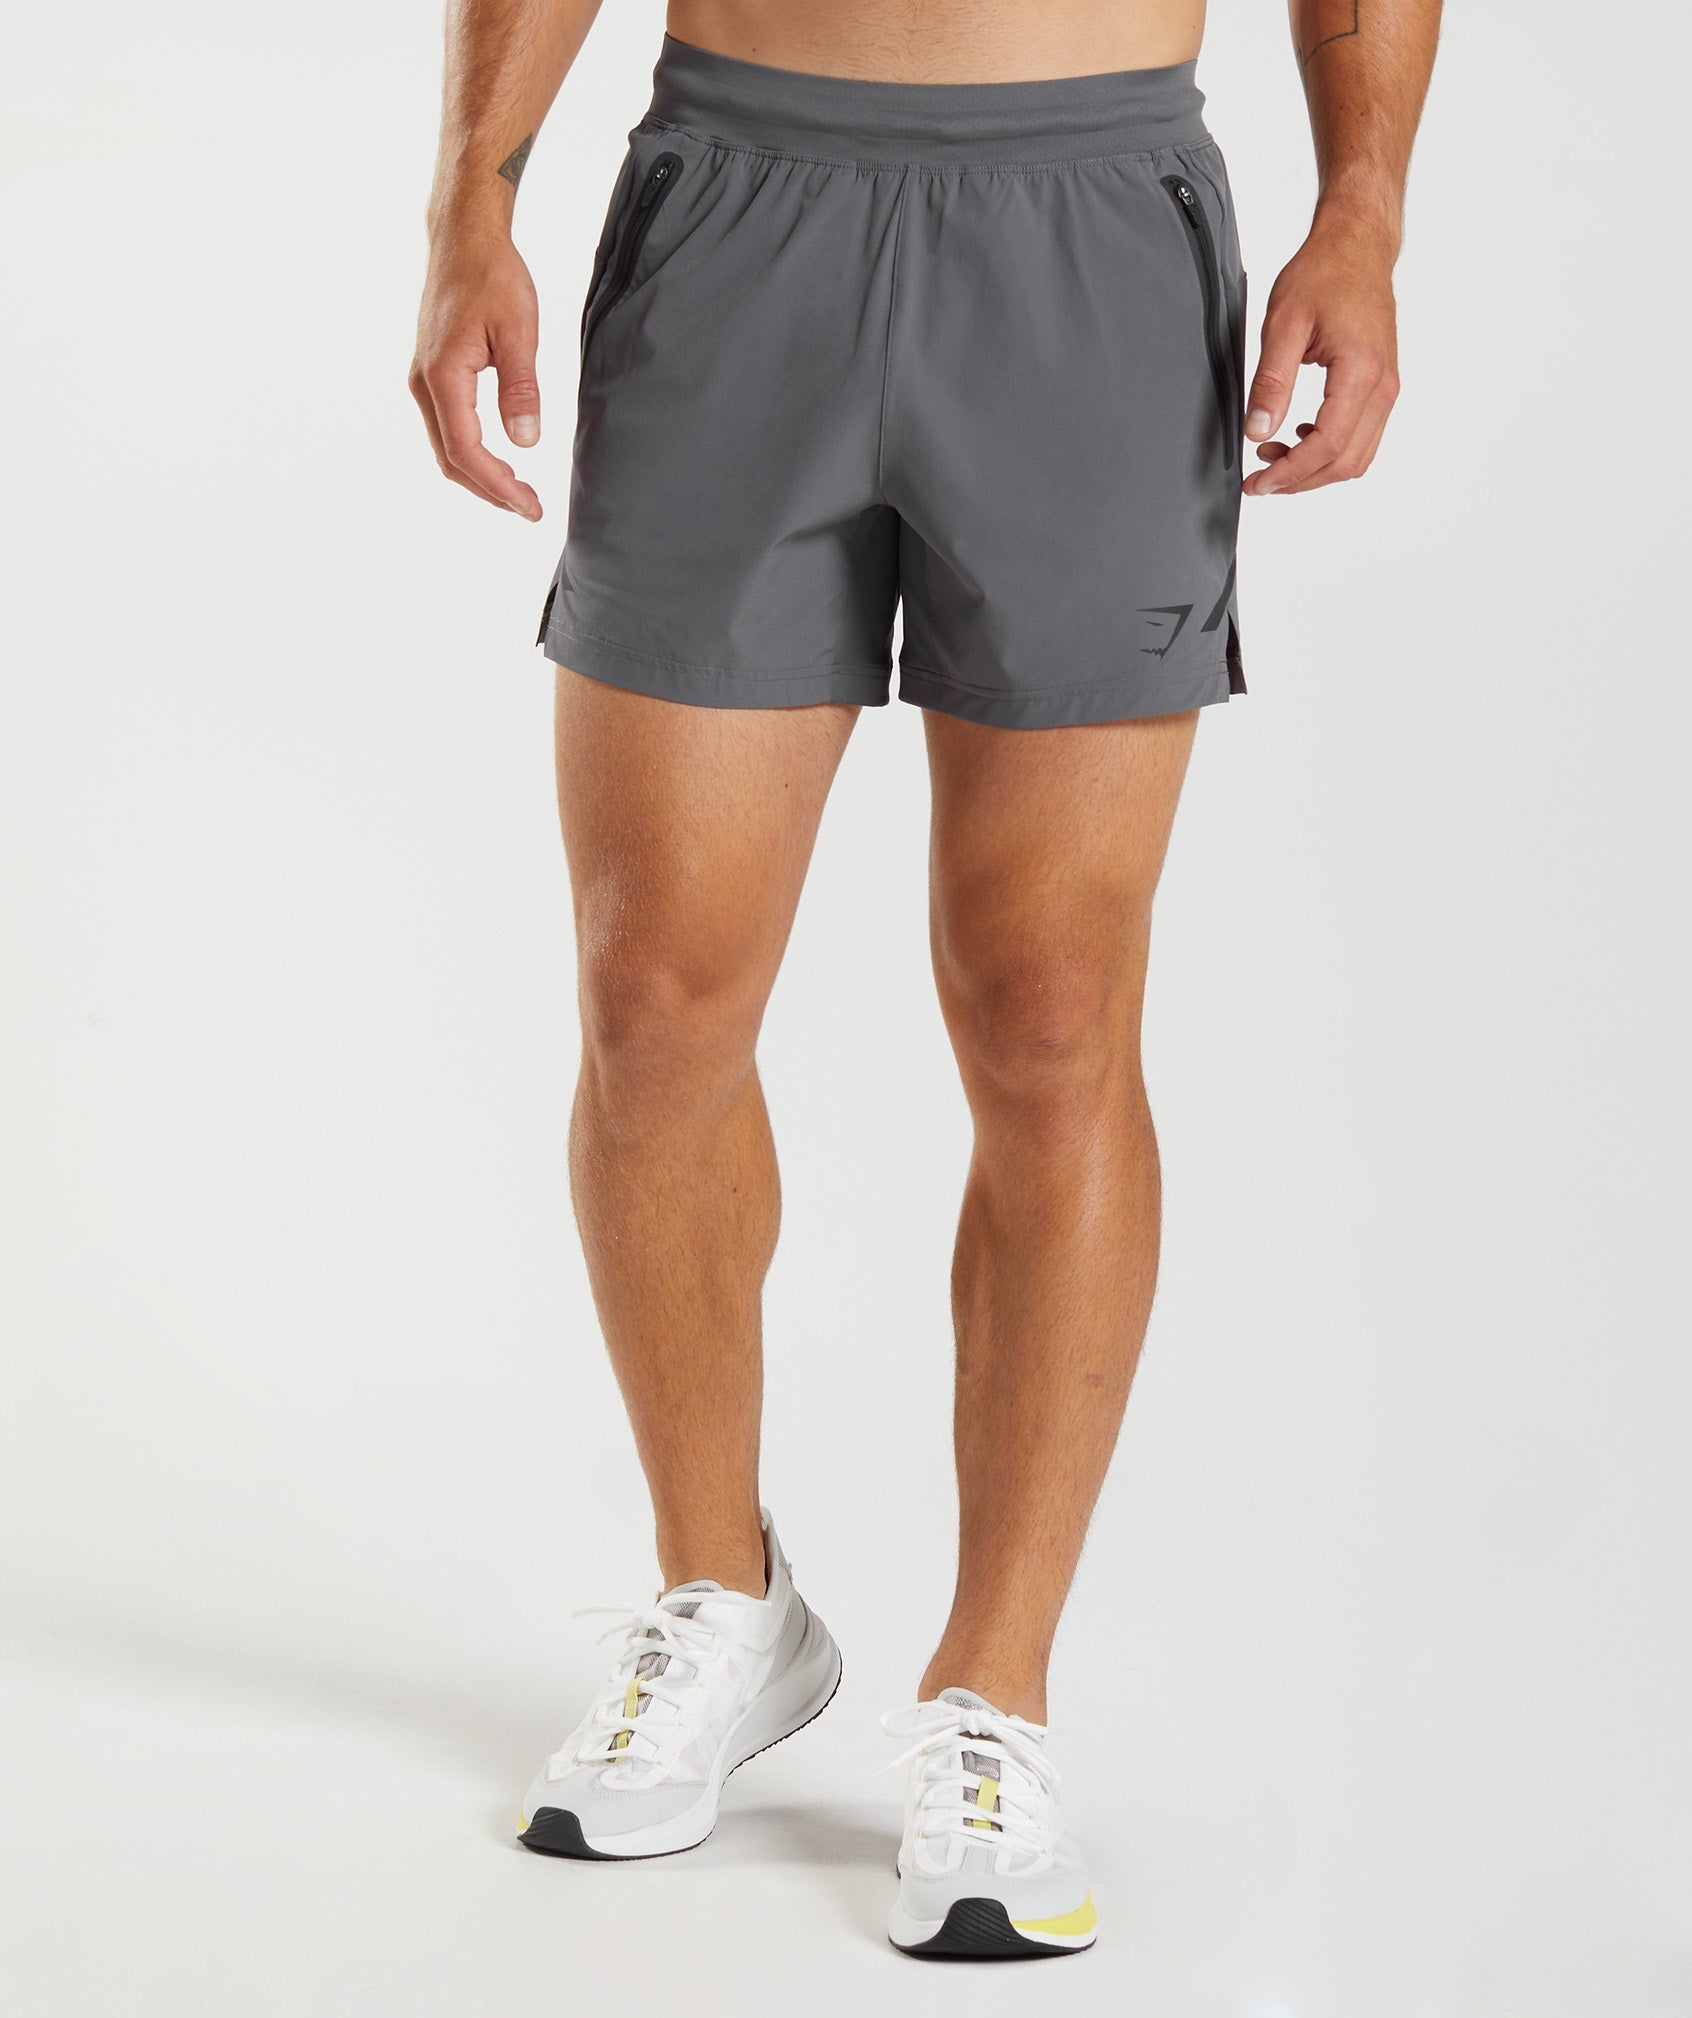 Apex 5" Perform Shorts in Silhouette Grey - view 1